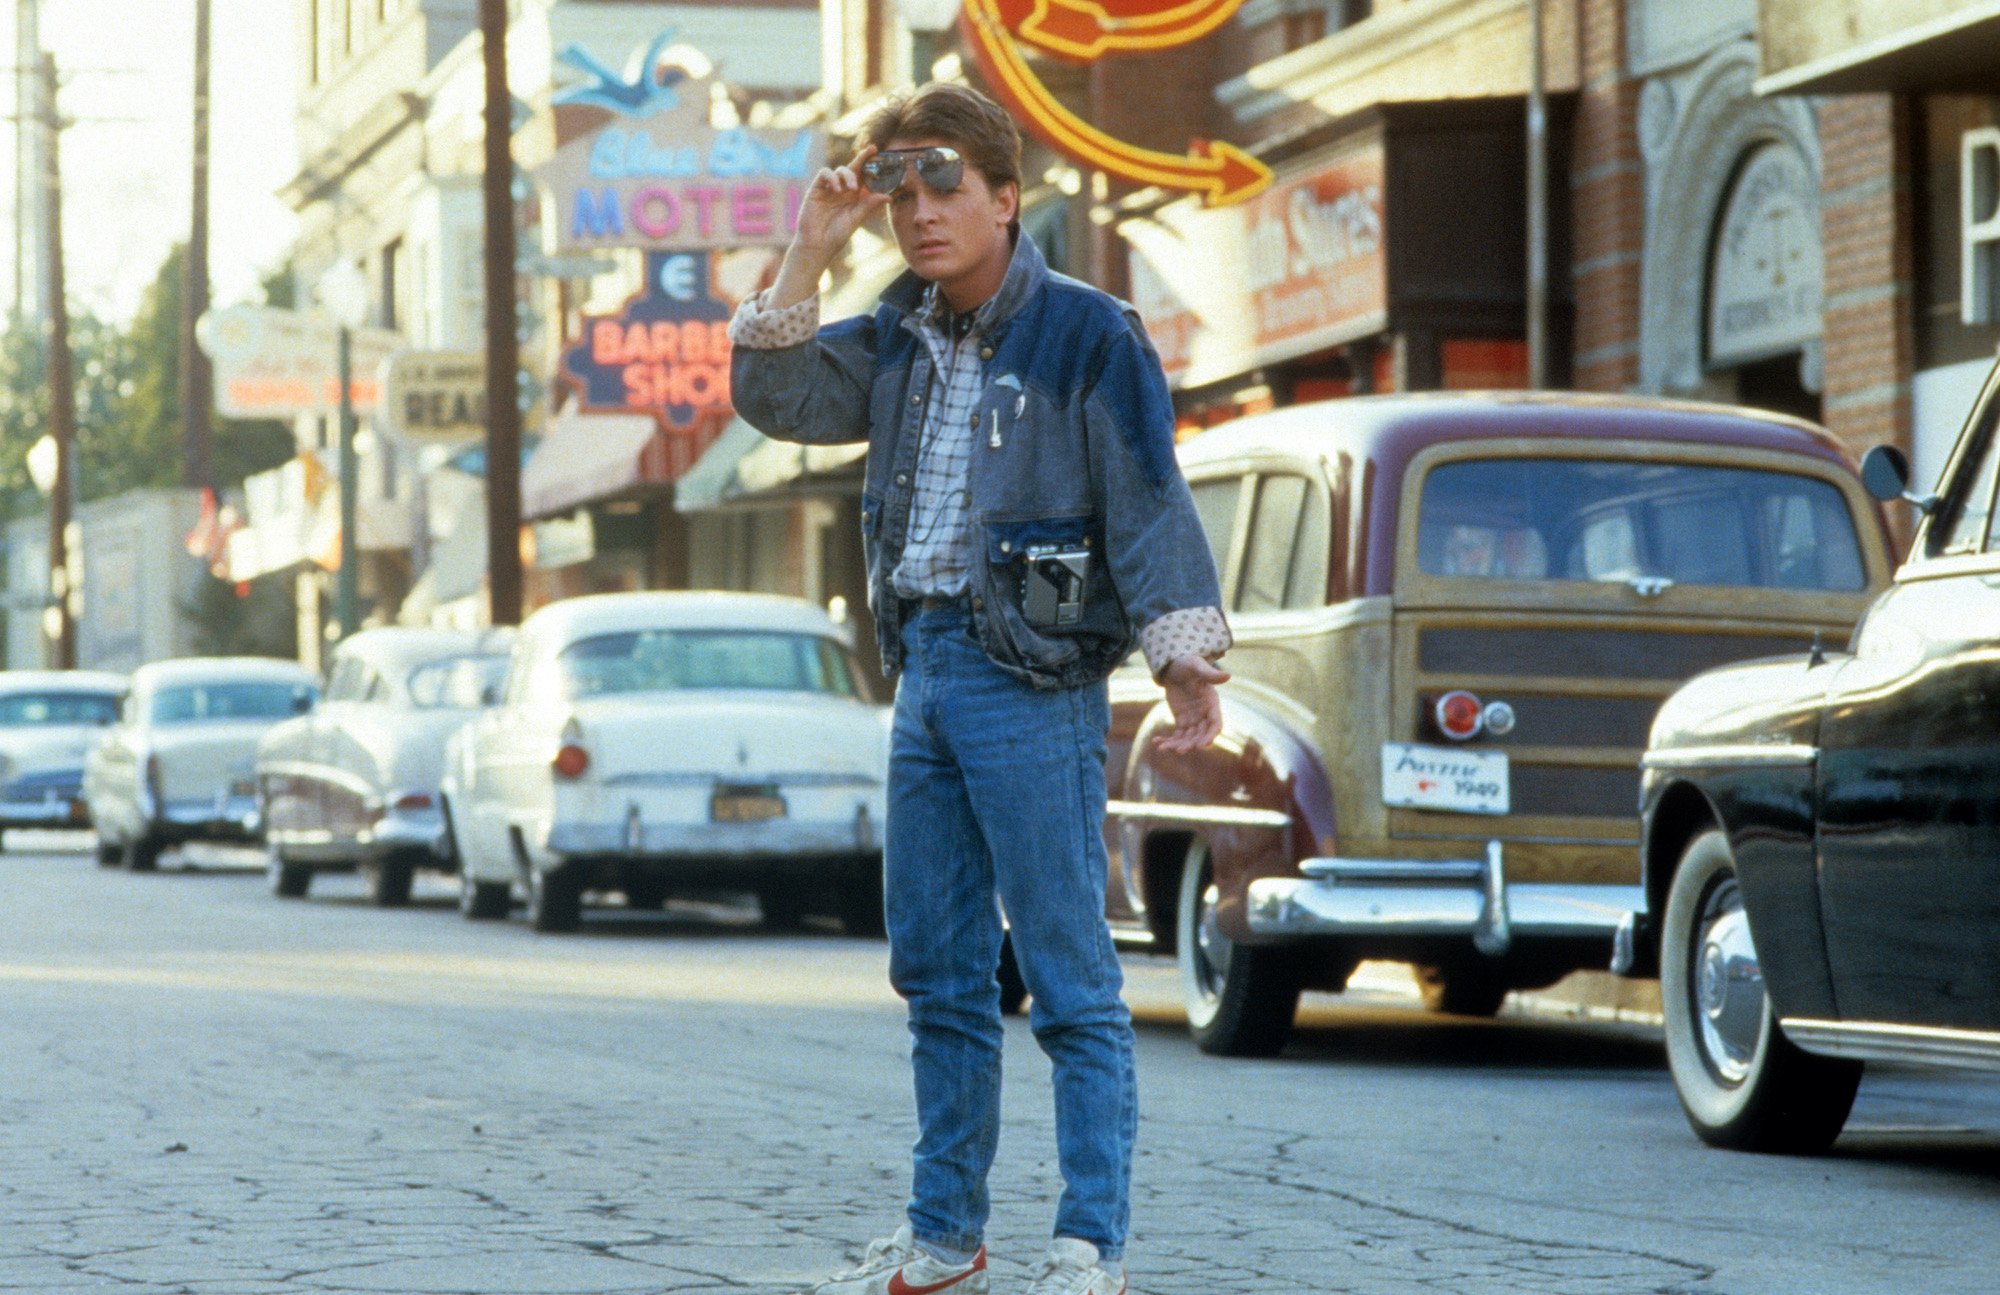 Michael J Fox walking across the street in a scene from 'Back To The Future